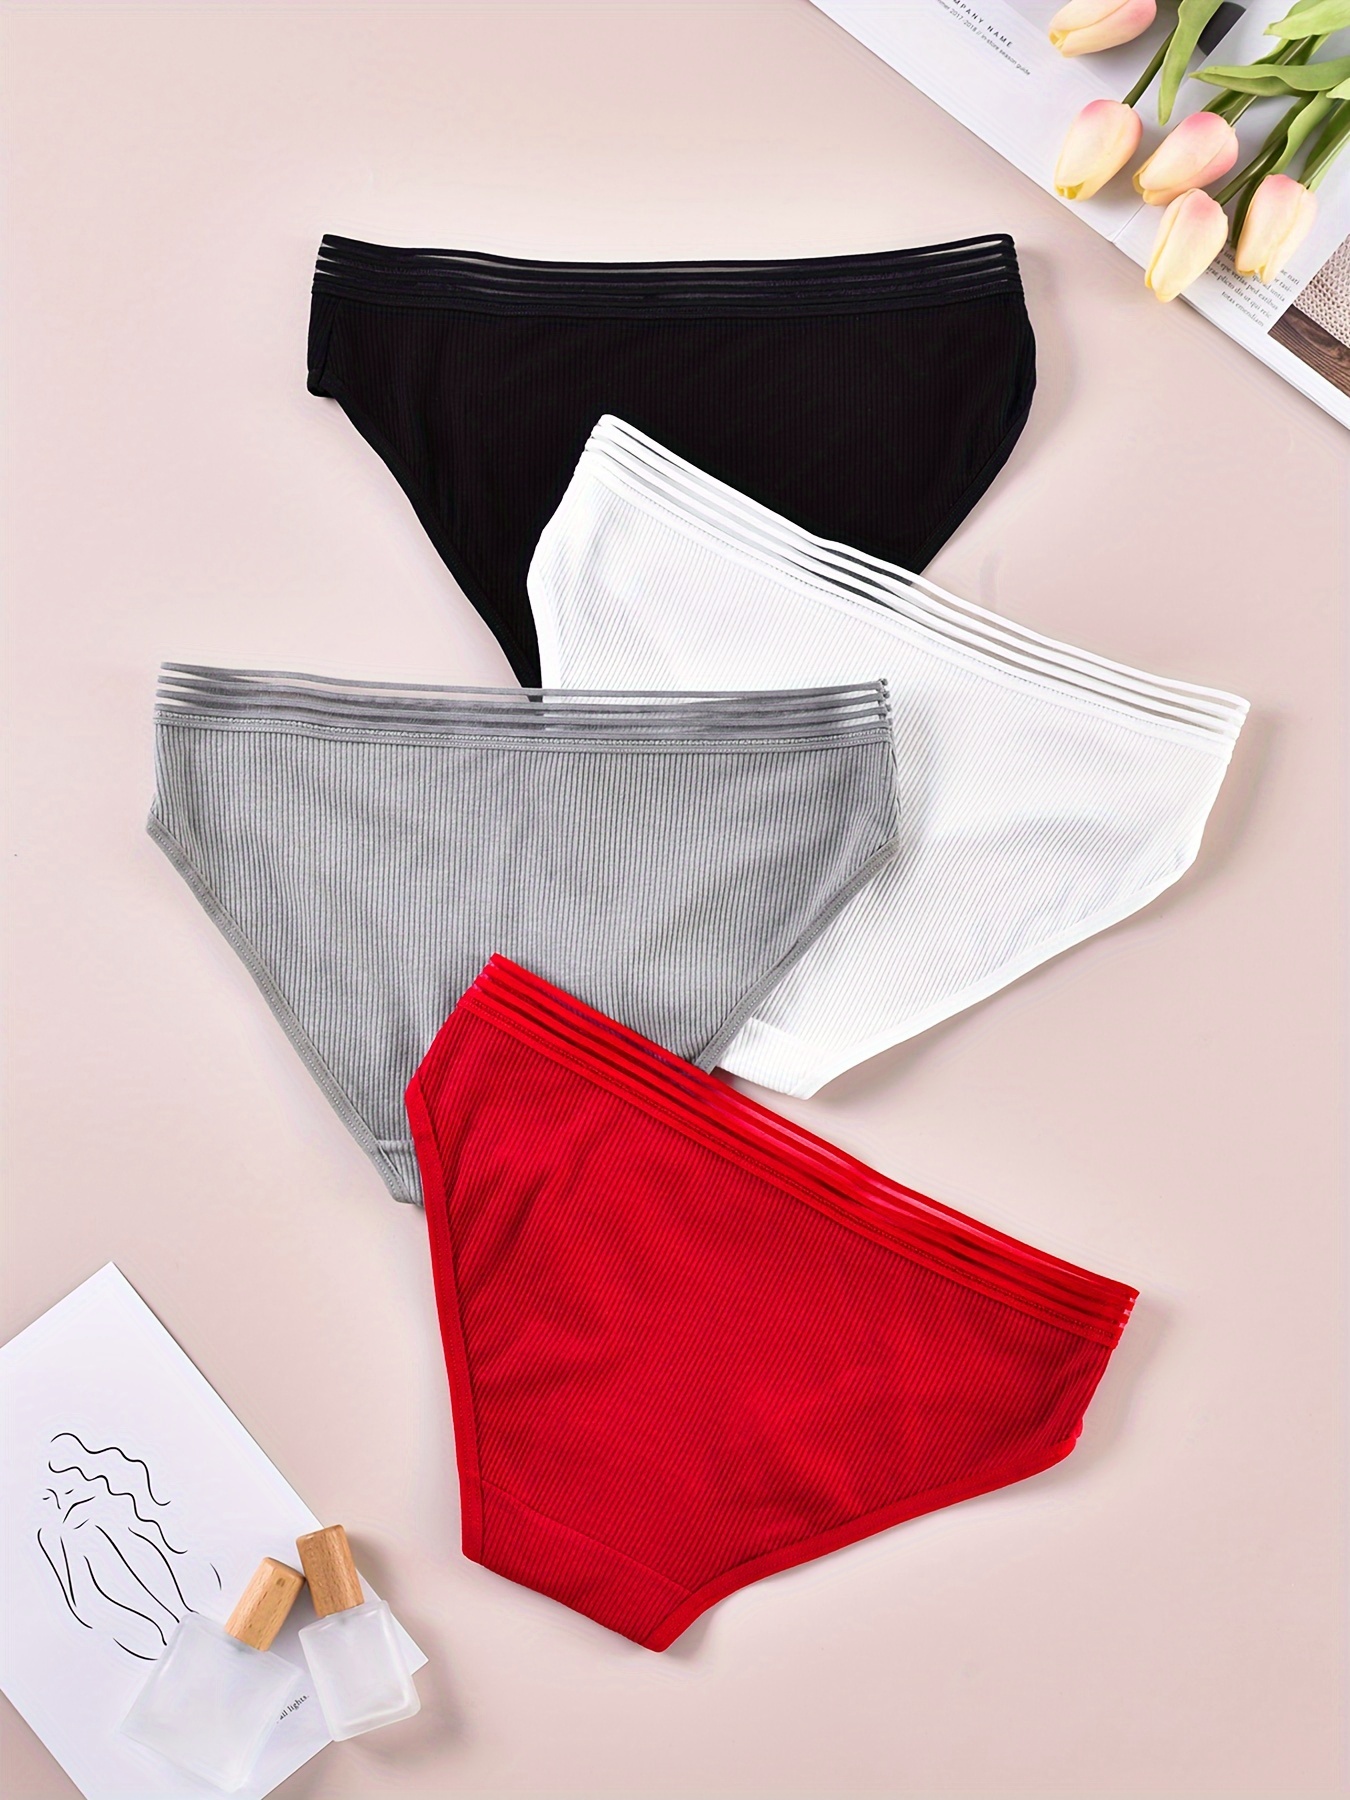 FINETOO Colorful Cotton Panties for Women Sexy Striped Underwear G